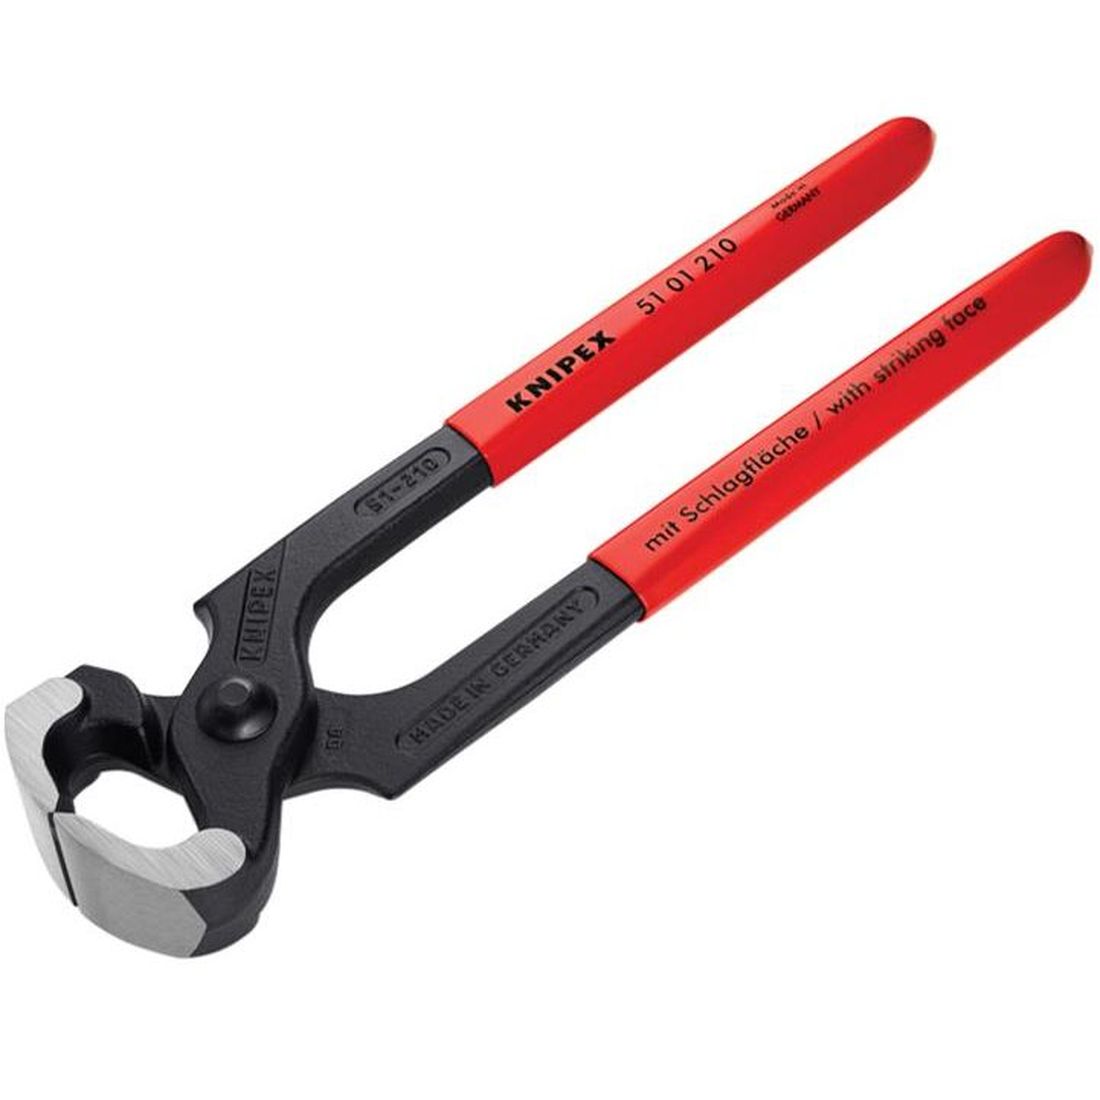 Knipex Hammerhead Style Carpenter's Pincers PVC Grip 210mm (8.1/4in)                   